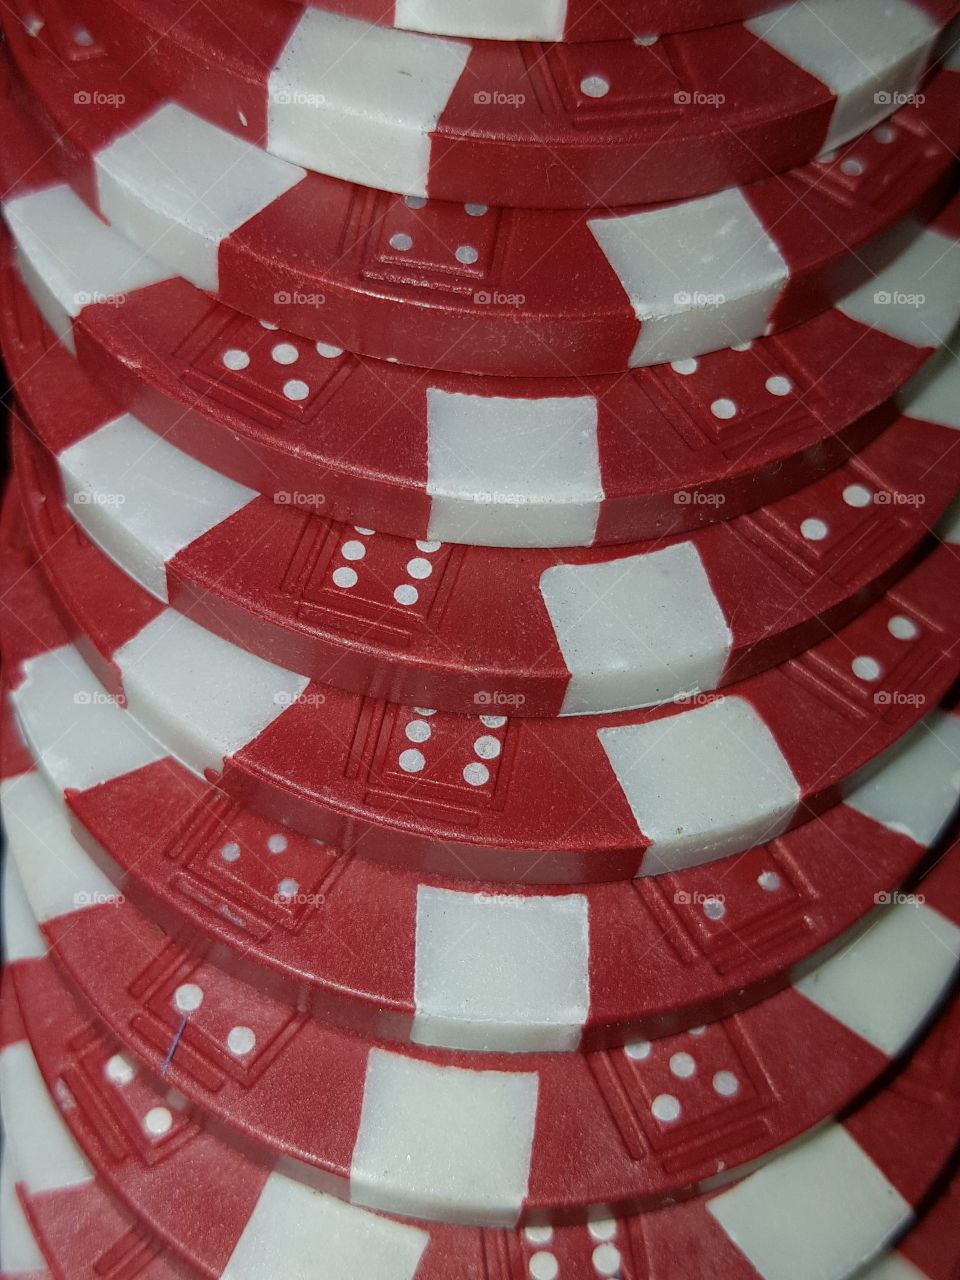 Red and white poker chips